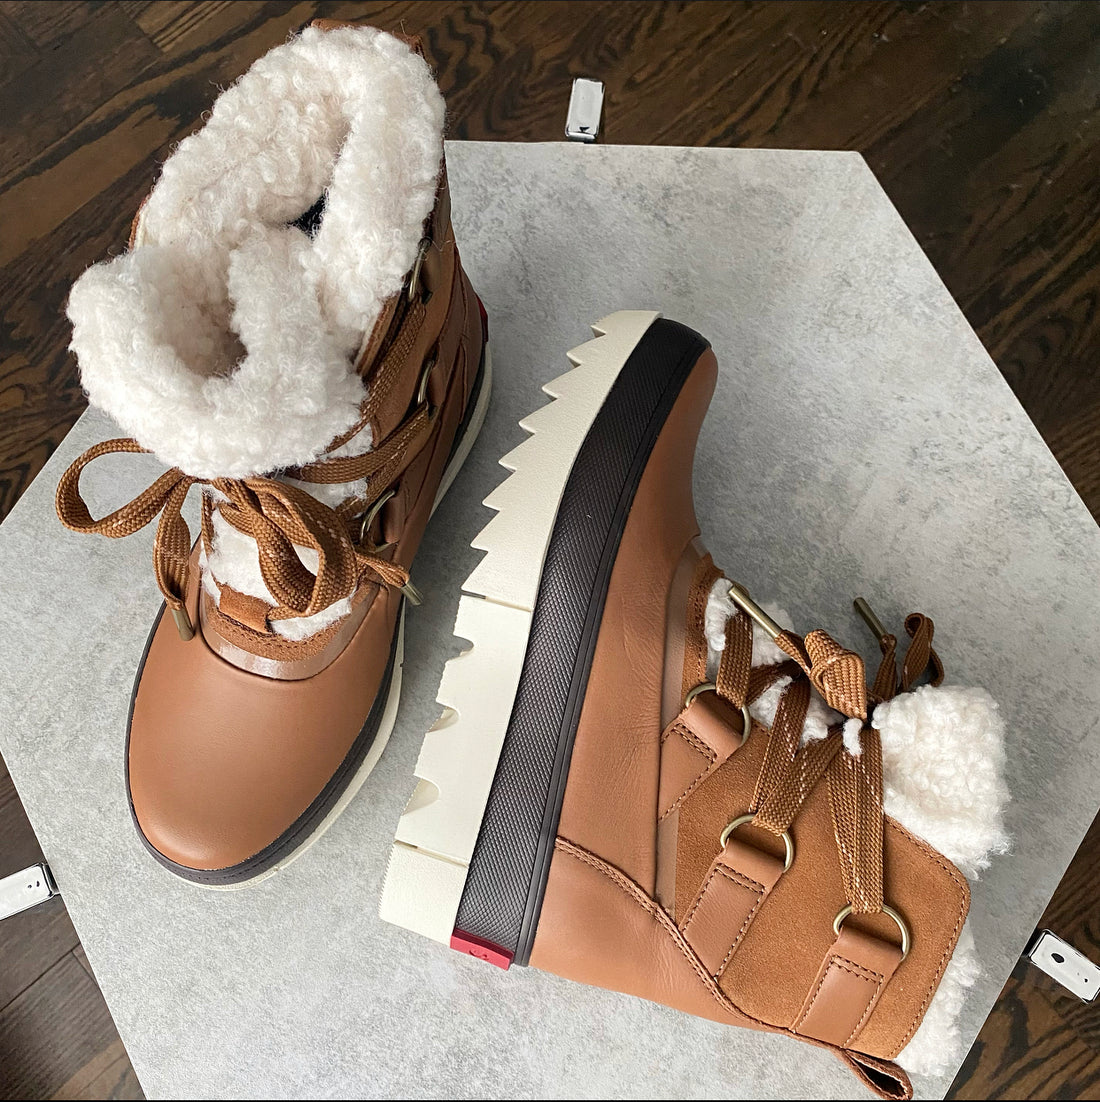 Sorel Joan of Arctic Brown Faux Shearling Snow Boots - 7